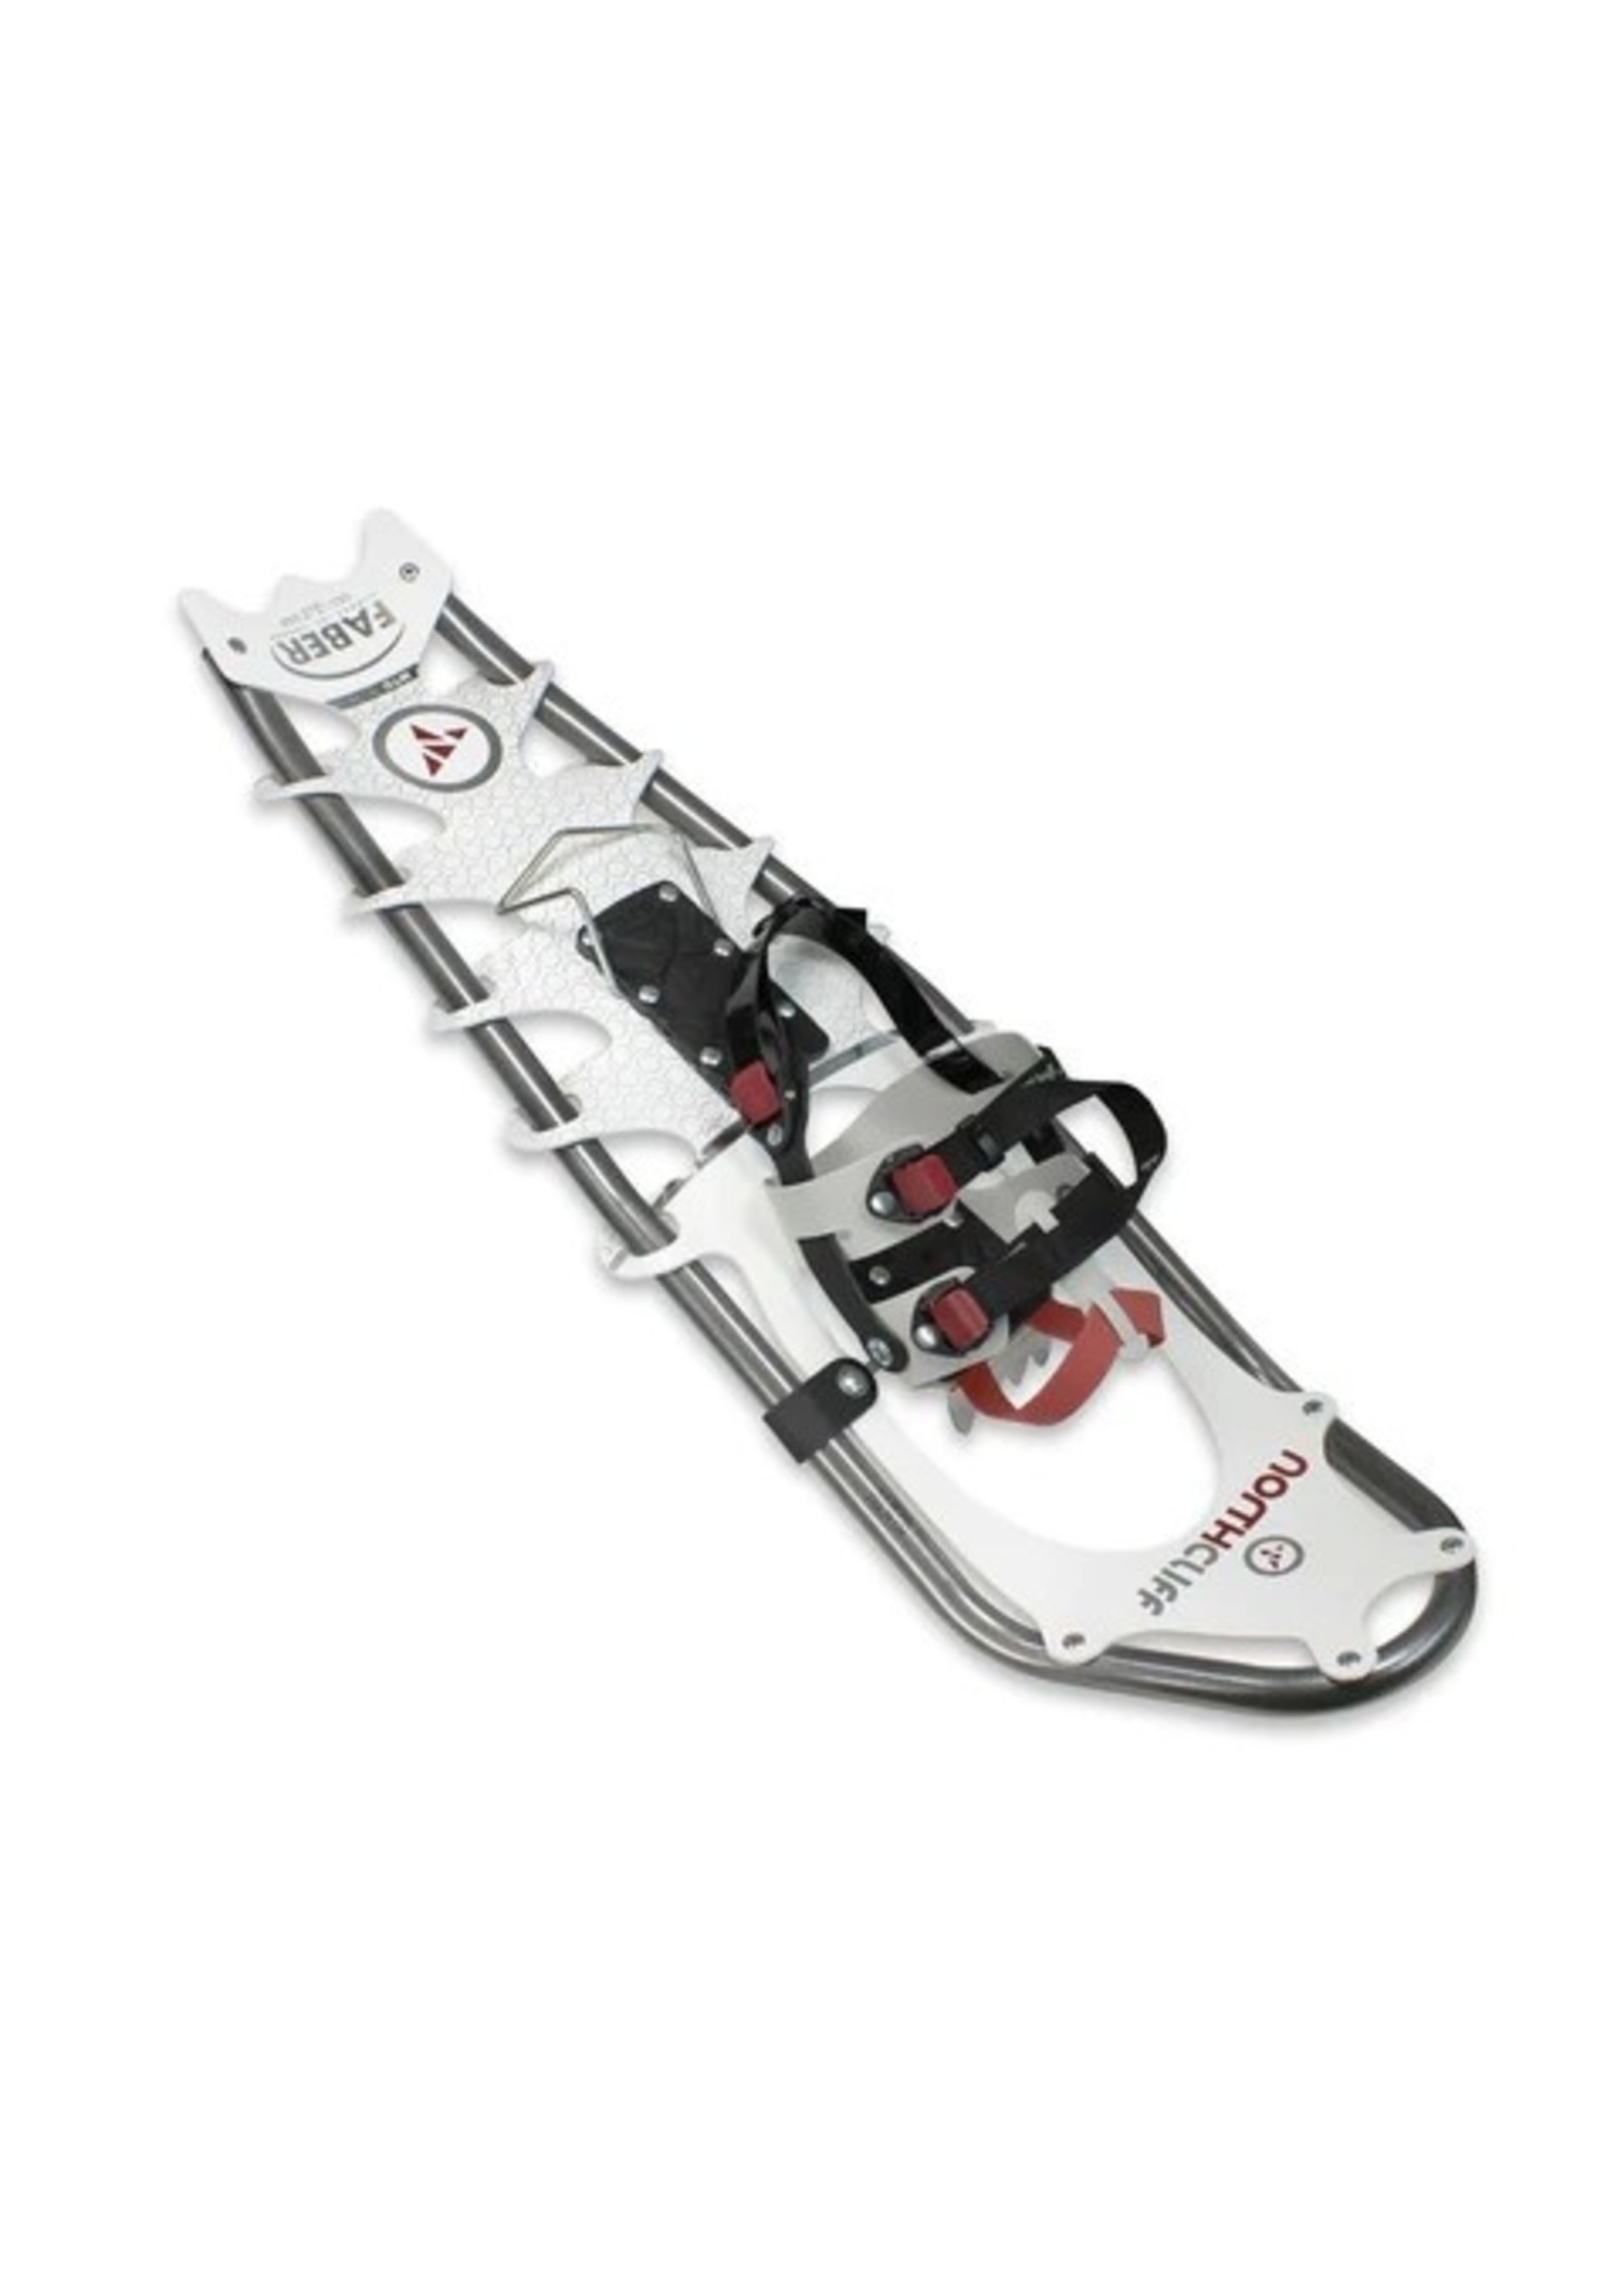 FABER NORTH CLIFF SNOWSHOE 8" X 25" 150LBS